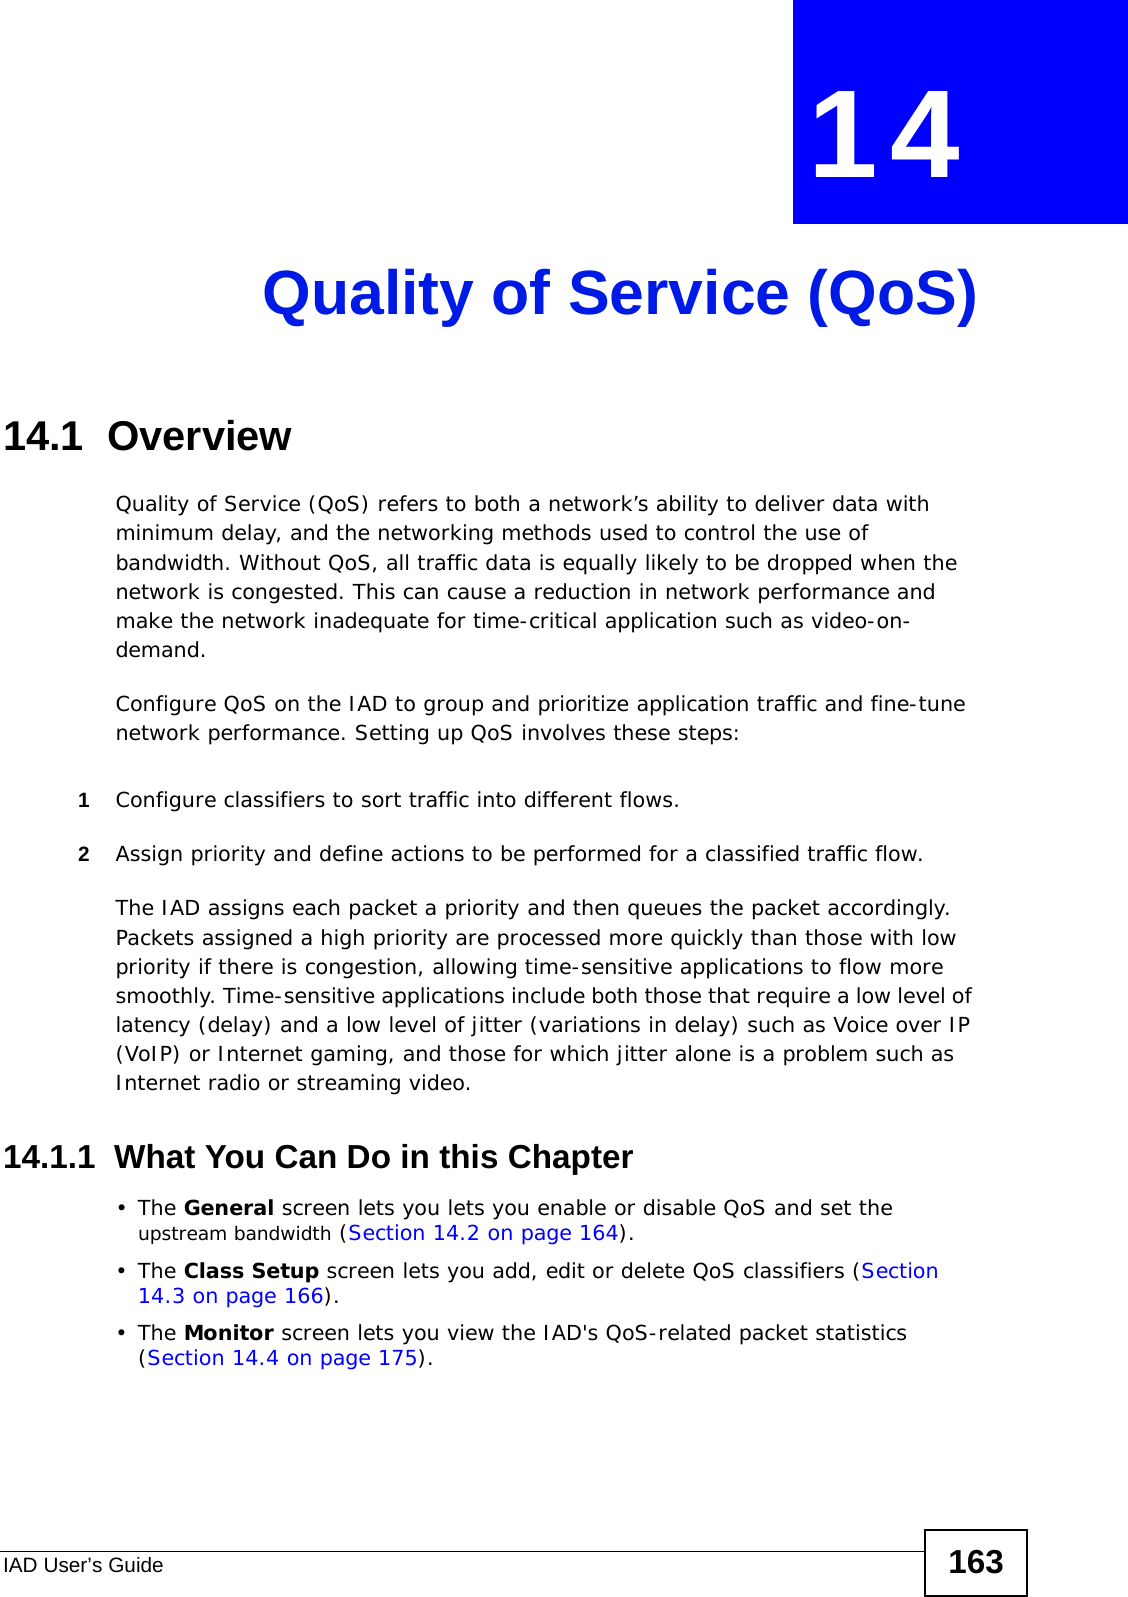 IAD User’s Guide 163CHAPTER  14 Quality of Service (QoS)14.1  Overview Quality of Service (QoS) refers to both a network’s ability to deliver data with minimum delay, and the networking methods used to control the use of bandwidth. Without QoS, all traffic data is equally likely to be dropped when the network is congested. This can cause a reduction in network performance and make the network inadequate for time-critical application such as video-on-demand.Configure QoS on the IAD to group and prioritize application traffic and fine-tune network performance. Setting up QoS involves these steps:1Configure classifiers to sort traffic into different flows. 2Assign priority and define actions to be performed for a classified traffic flow. The IAD assigns each packet a priority and then queues the packet accordingly. Packets assigned a high priority are processed more quickly than those with low priority if there is congestion, allowing time-sensitive applications to flow more smoothly. Time-sensitive applications include both those that require a low level of latency (delay) and a low level of jitter (variations in delay) such as Voice over IP (VoIP) or Internet gaming, and those for which jitter alone is a problem such as Internet radio or streaming video.14.1.1  What You Can Do in this Chapter•The General screen lets you lets you enable or disable QoS and set the upstream bandwidth (Section 14.2 on page 164).•The Class Setup screen lets you add, edit or delete QoS classifiers (Section 14.3 on page 166).•The Monitor screen lets you view the IAD&apos;s QoS-related packet statistics (Section 14.4 on page 175).